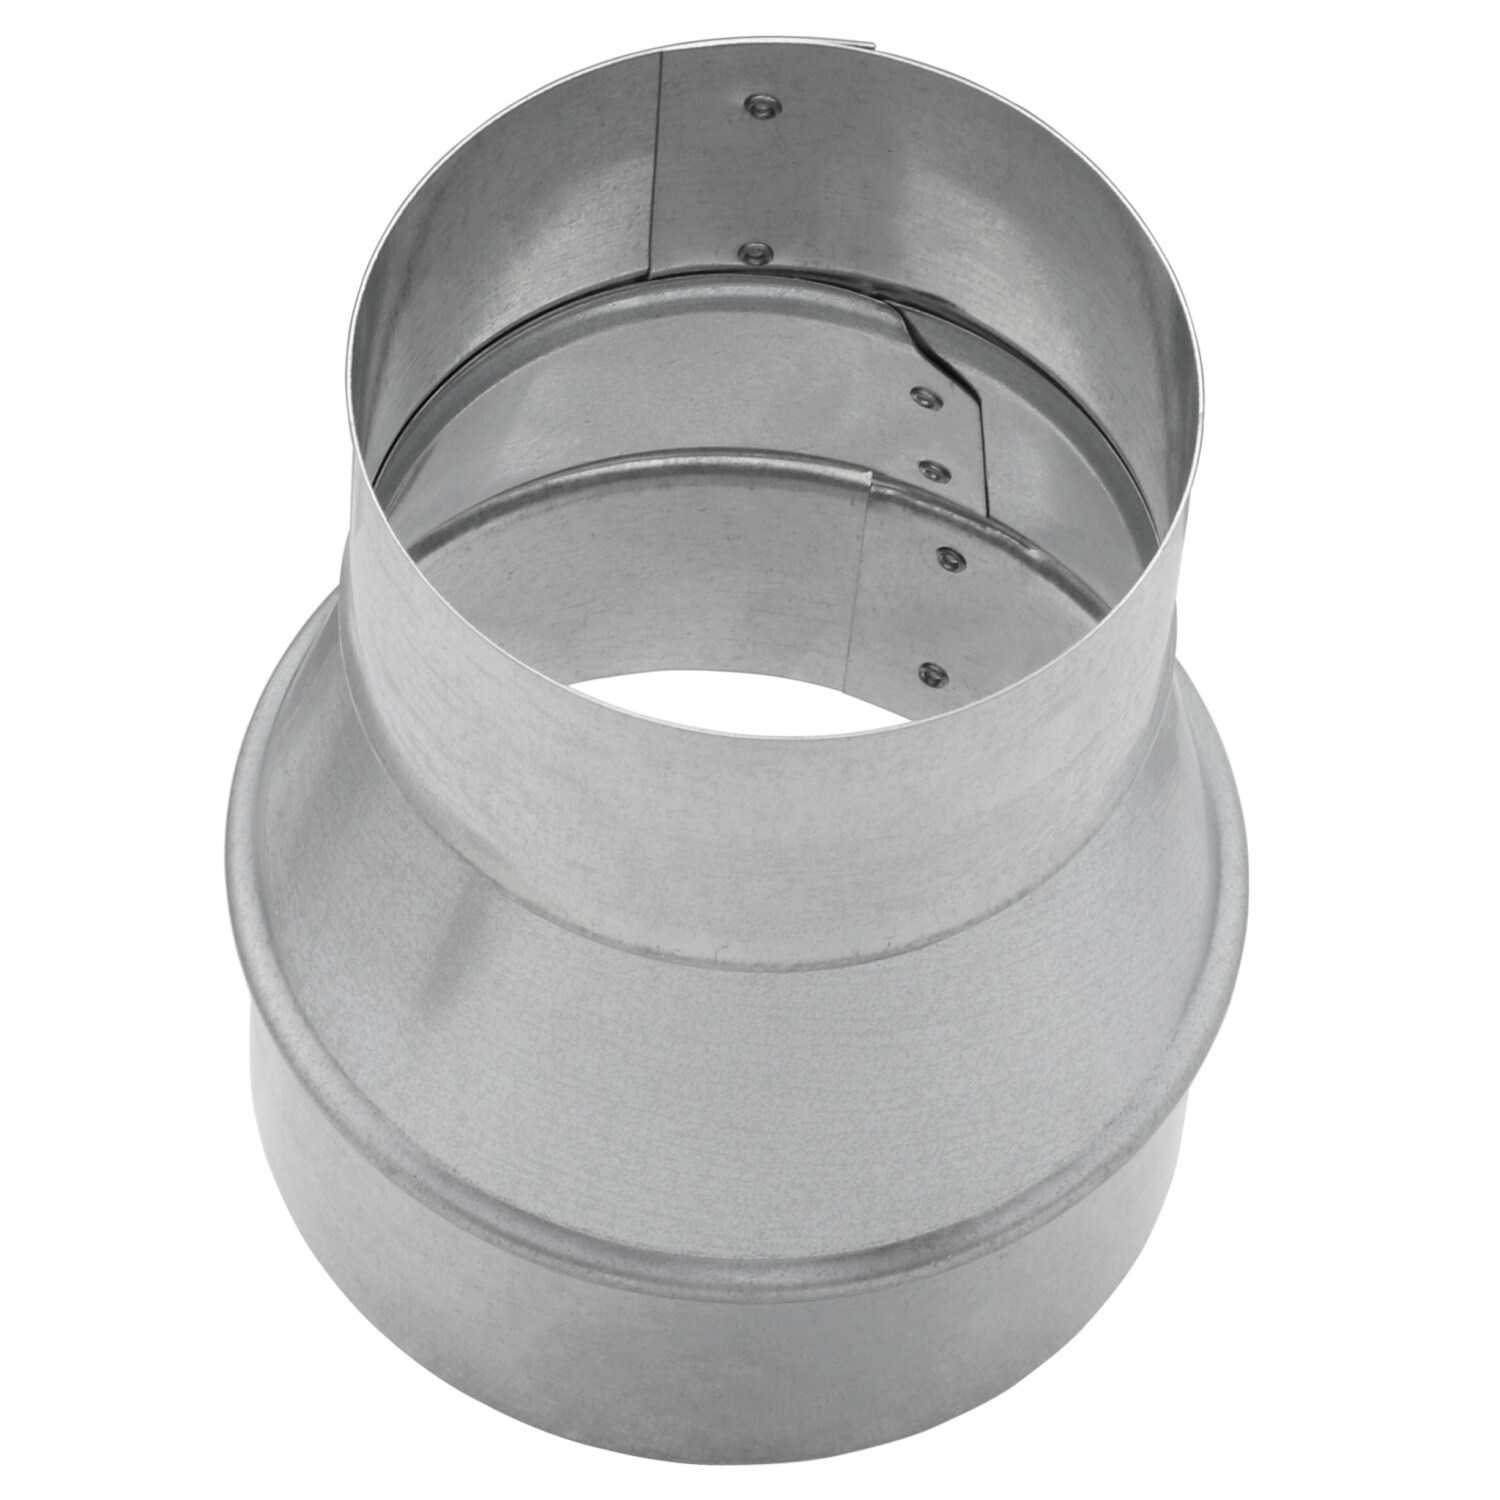 7 to 5  7x5  5x7 Single Wall Metal Reducer Increaser for Duct Other purpose. 